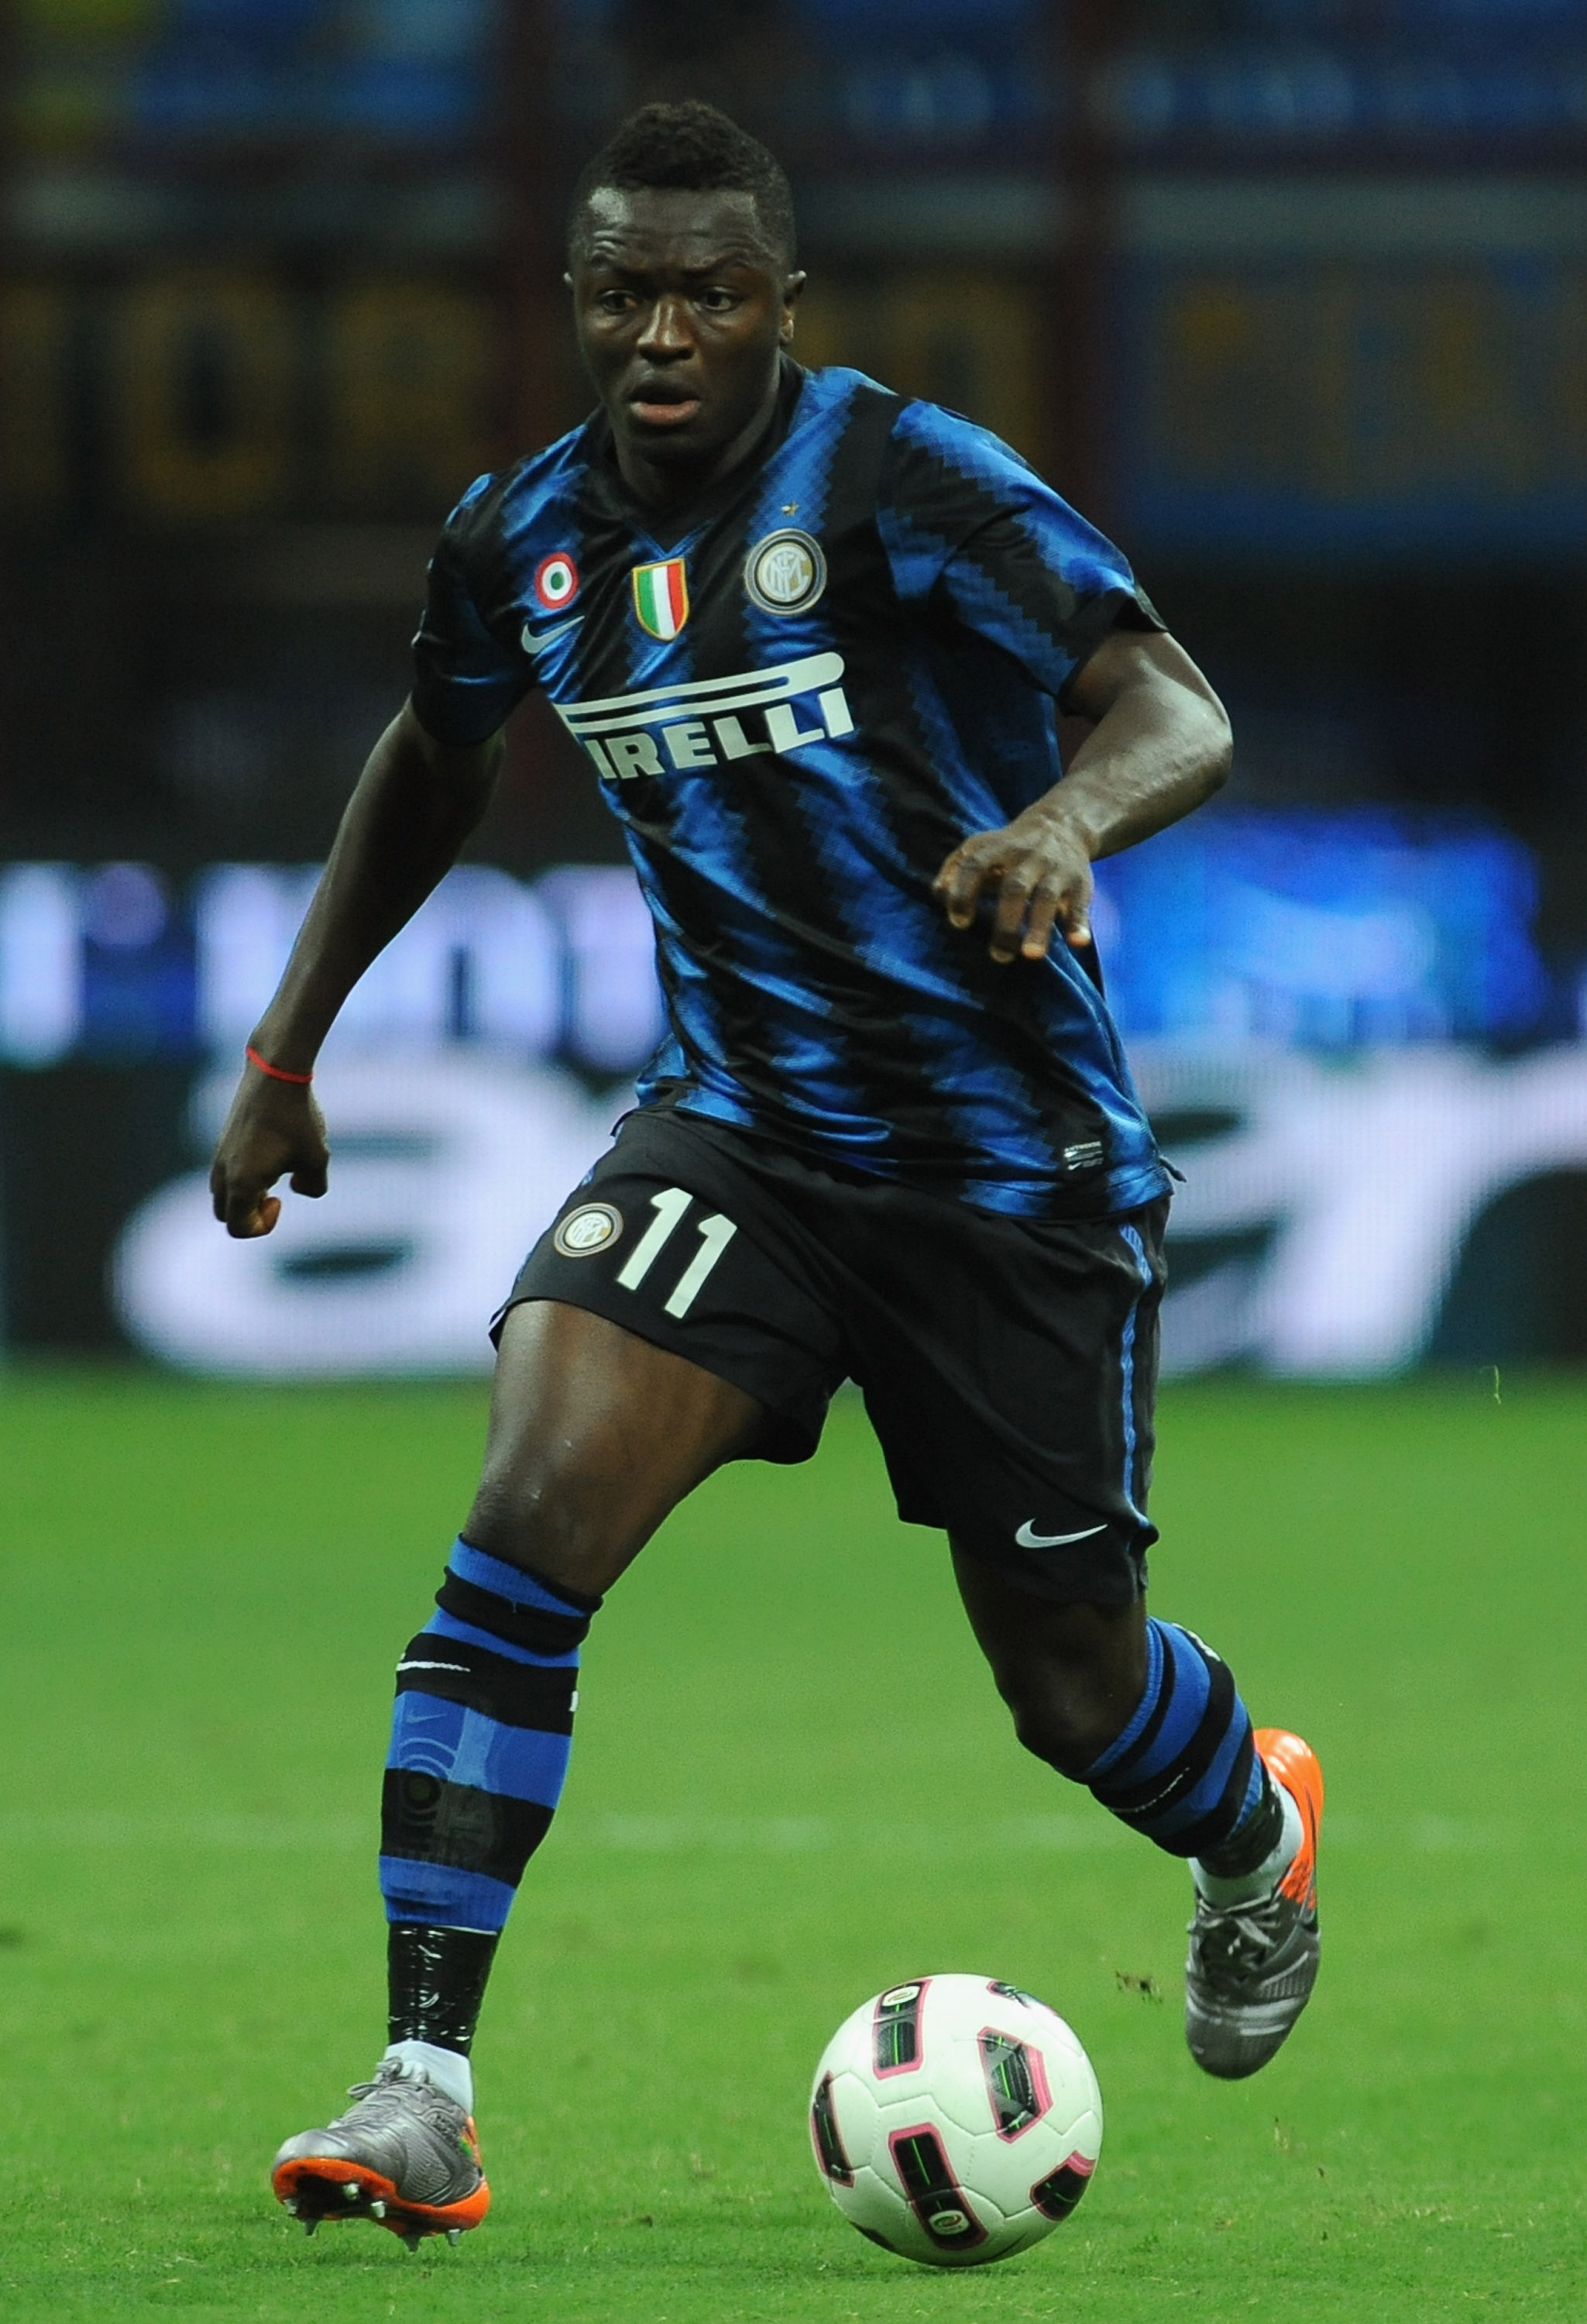 MILAN, ITALY - SEPTEMBER 11:  Sulley Ali Muntari of FC Internazionale in action during the Serie A match between FC Internazionale and Udinese Calcio at Stadio Giuseppe Meazza on September 11, 2010 in Milan, Italy.  (Photo by Valerio Pennicino/Getty Image